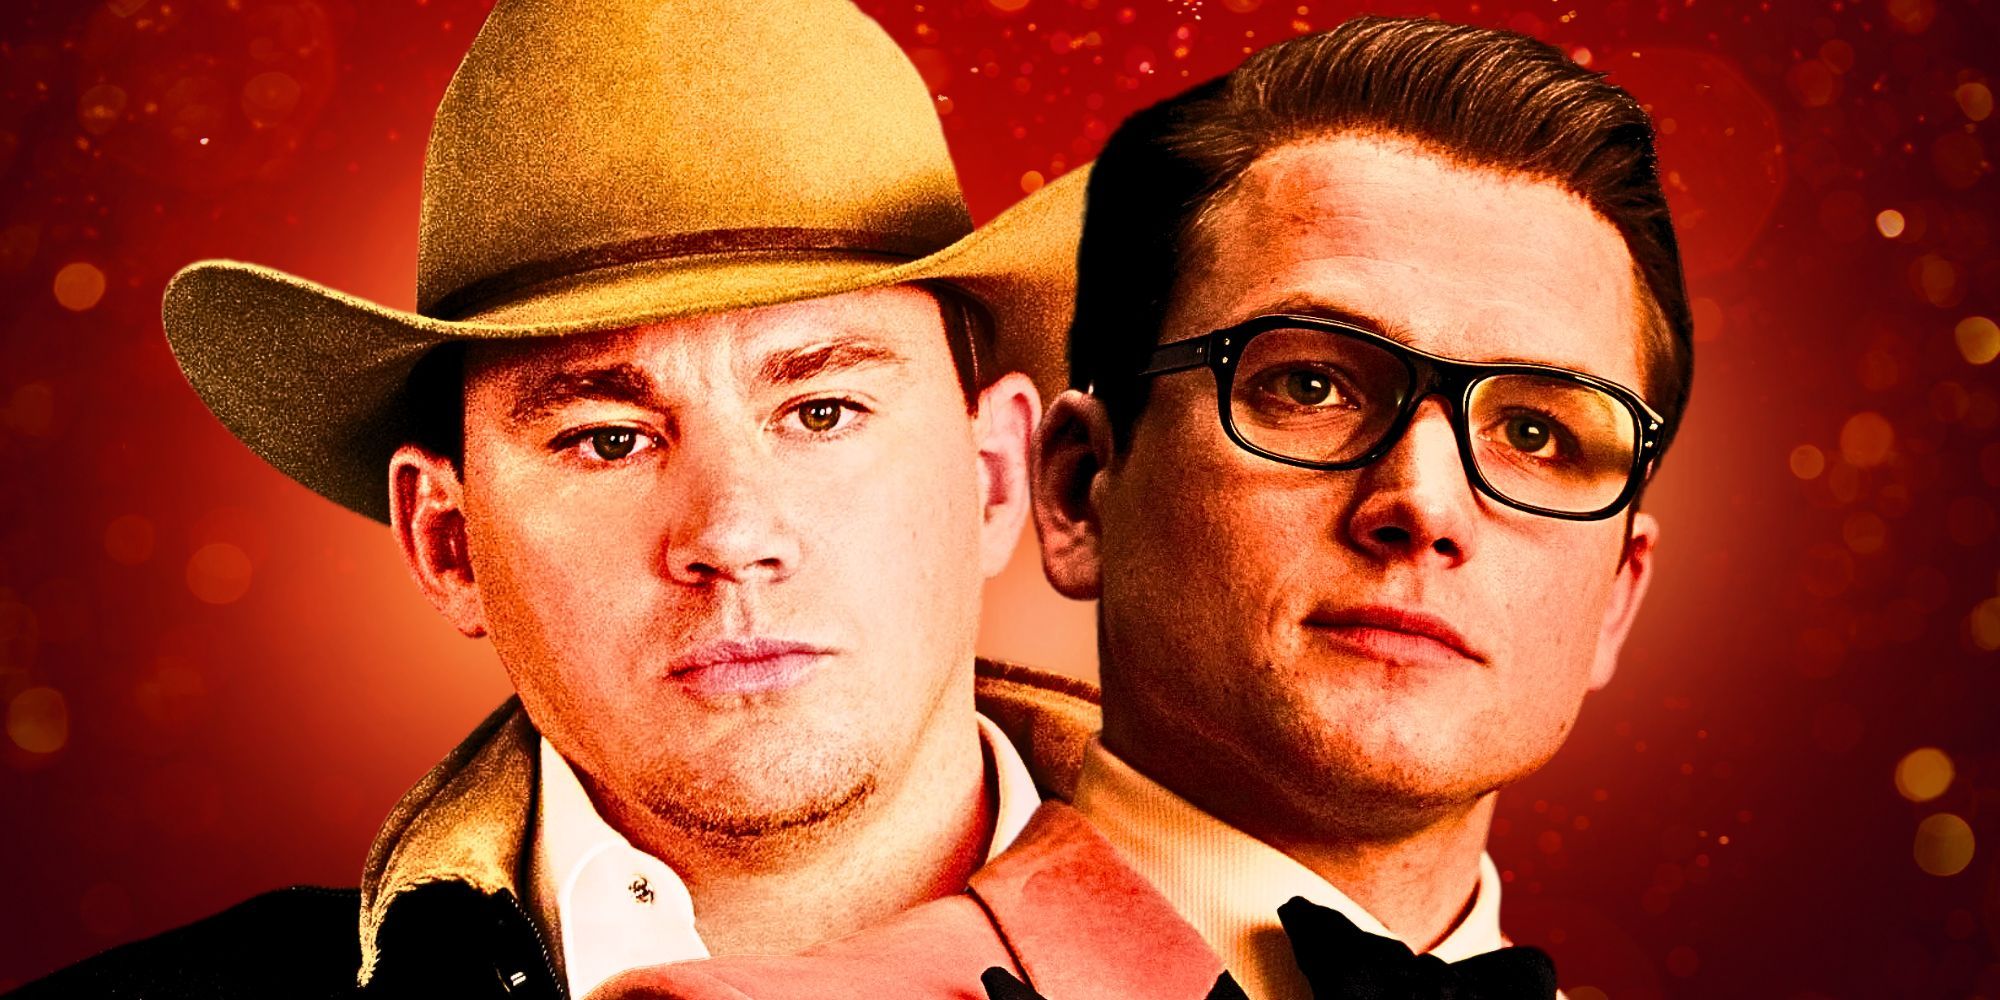 Tequila (Channing Tatum) and Eggsy (Taron Egerton) in Kingsman: The Golden Circle